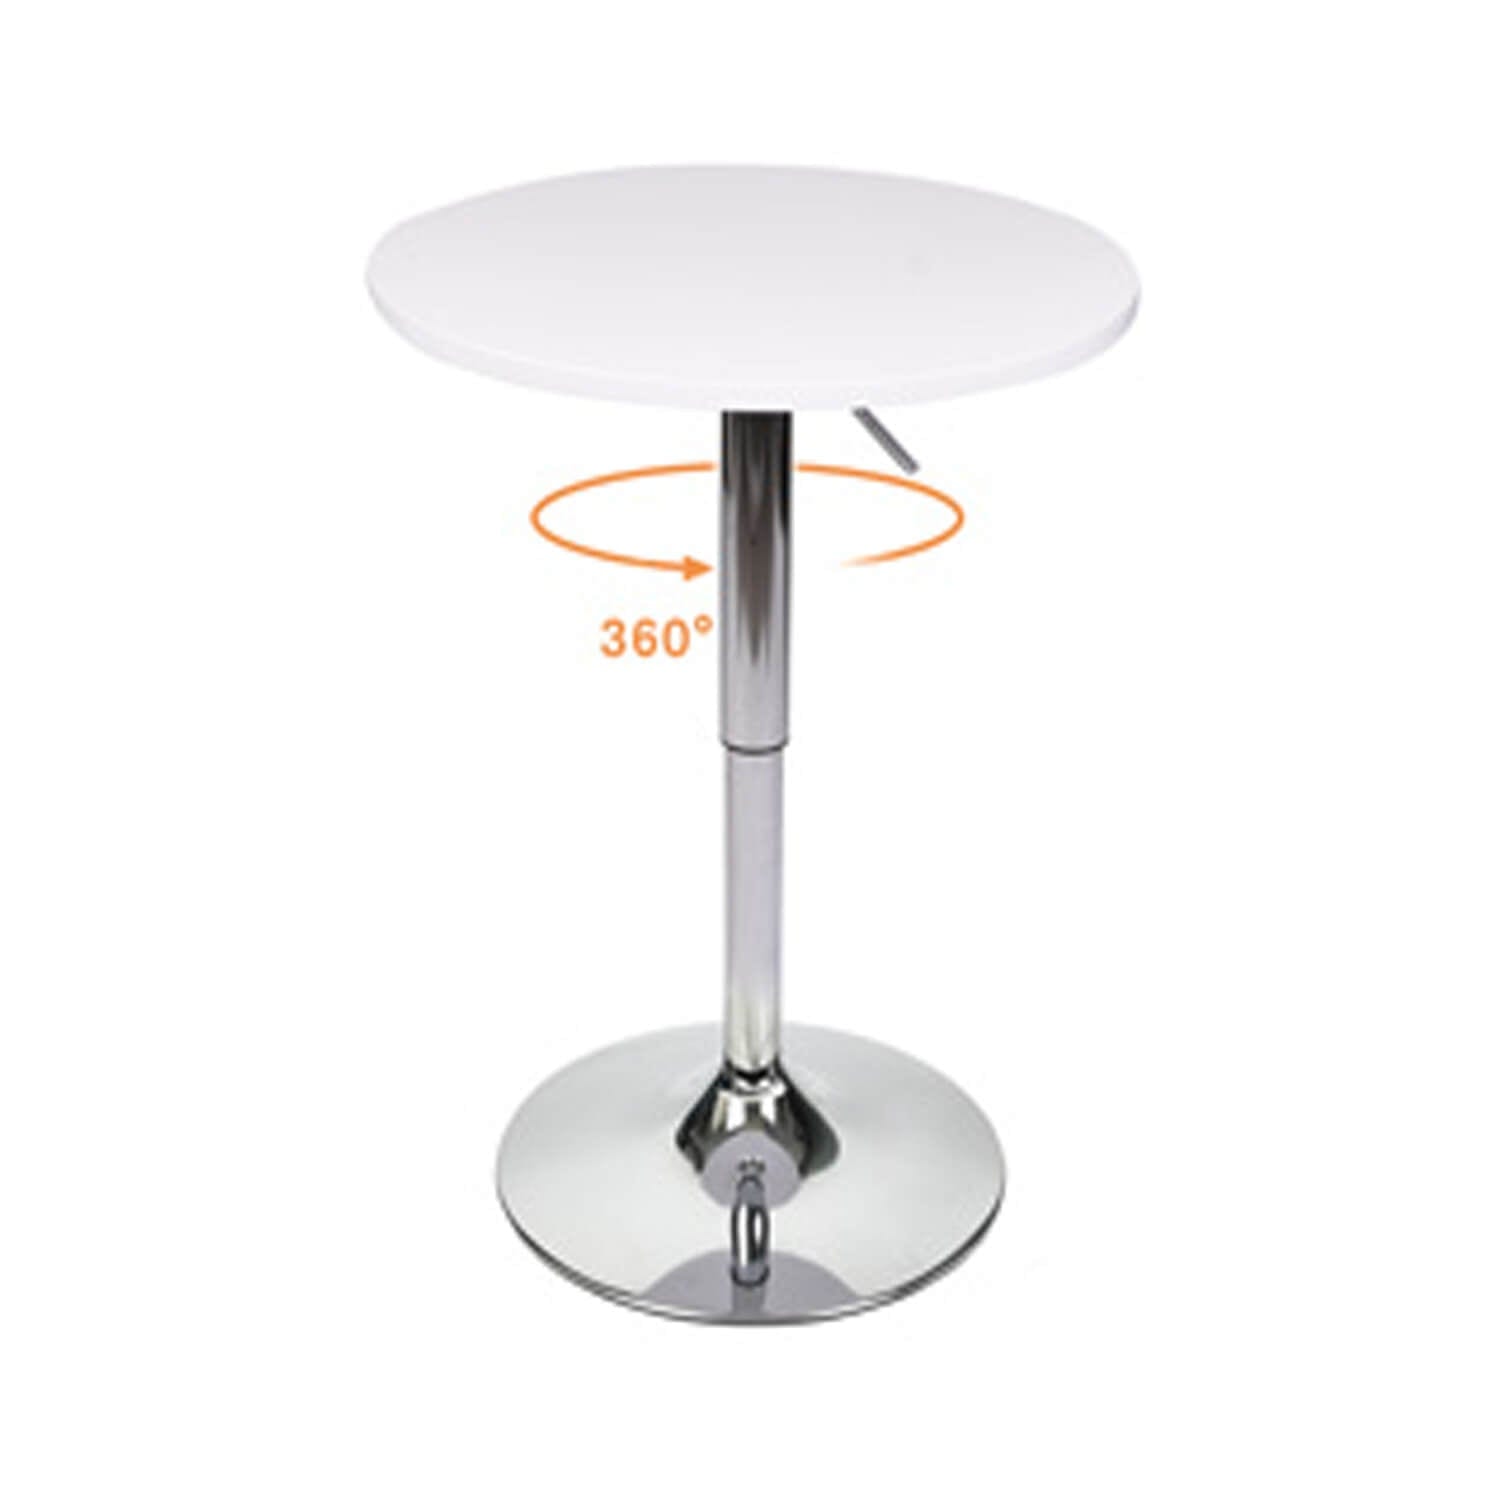 Elecwish White Table OW003 has special 360-degree rotation swivel